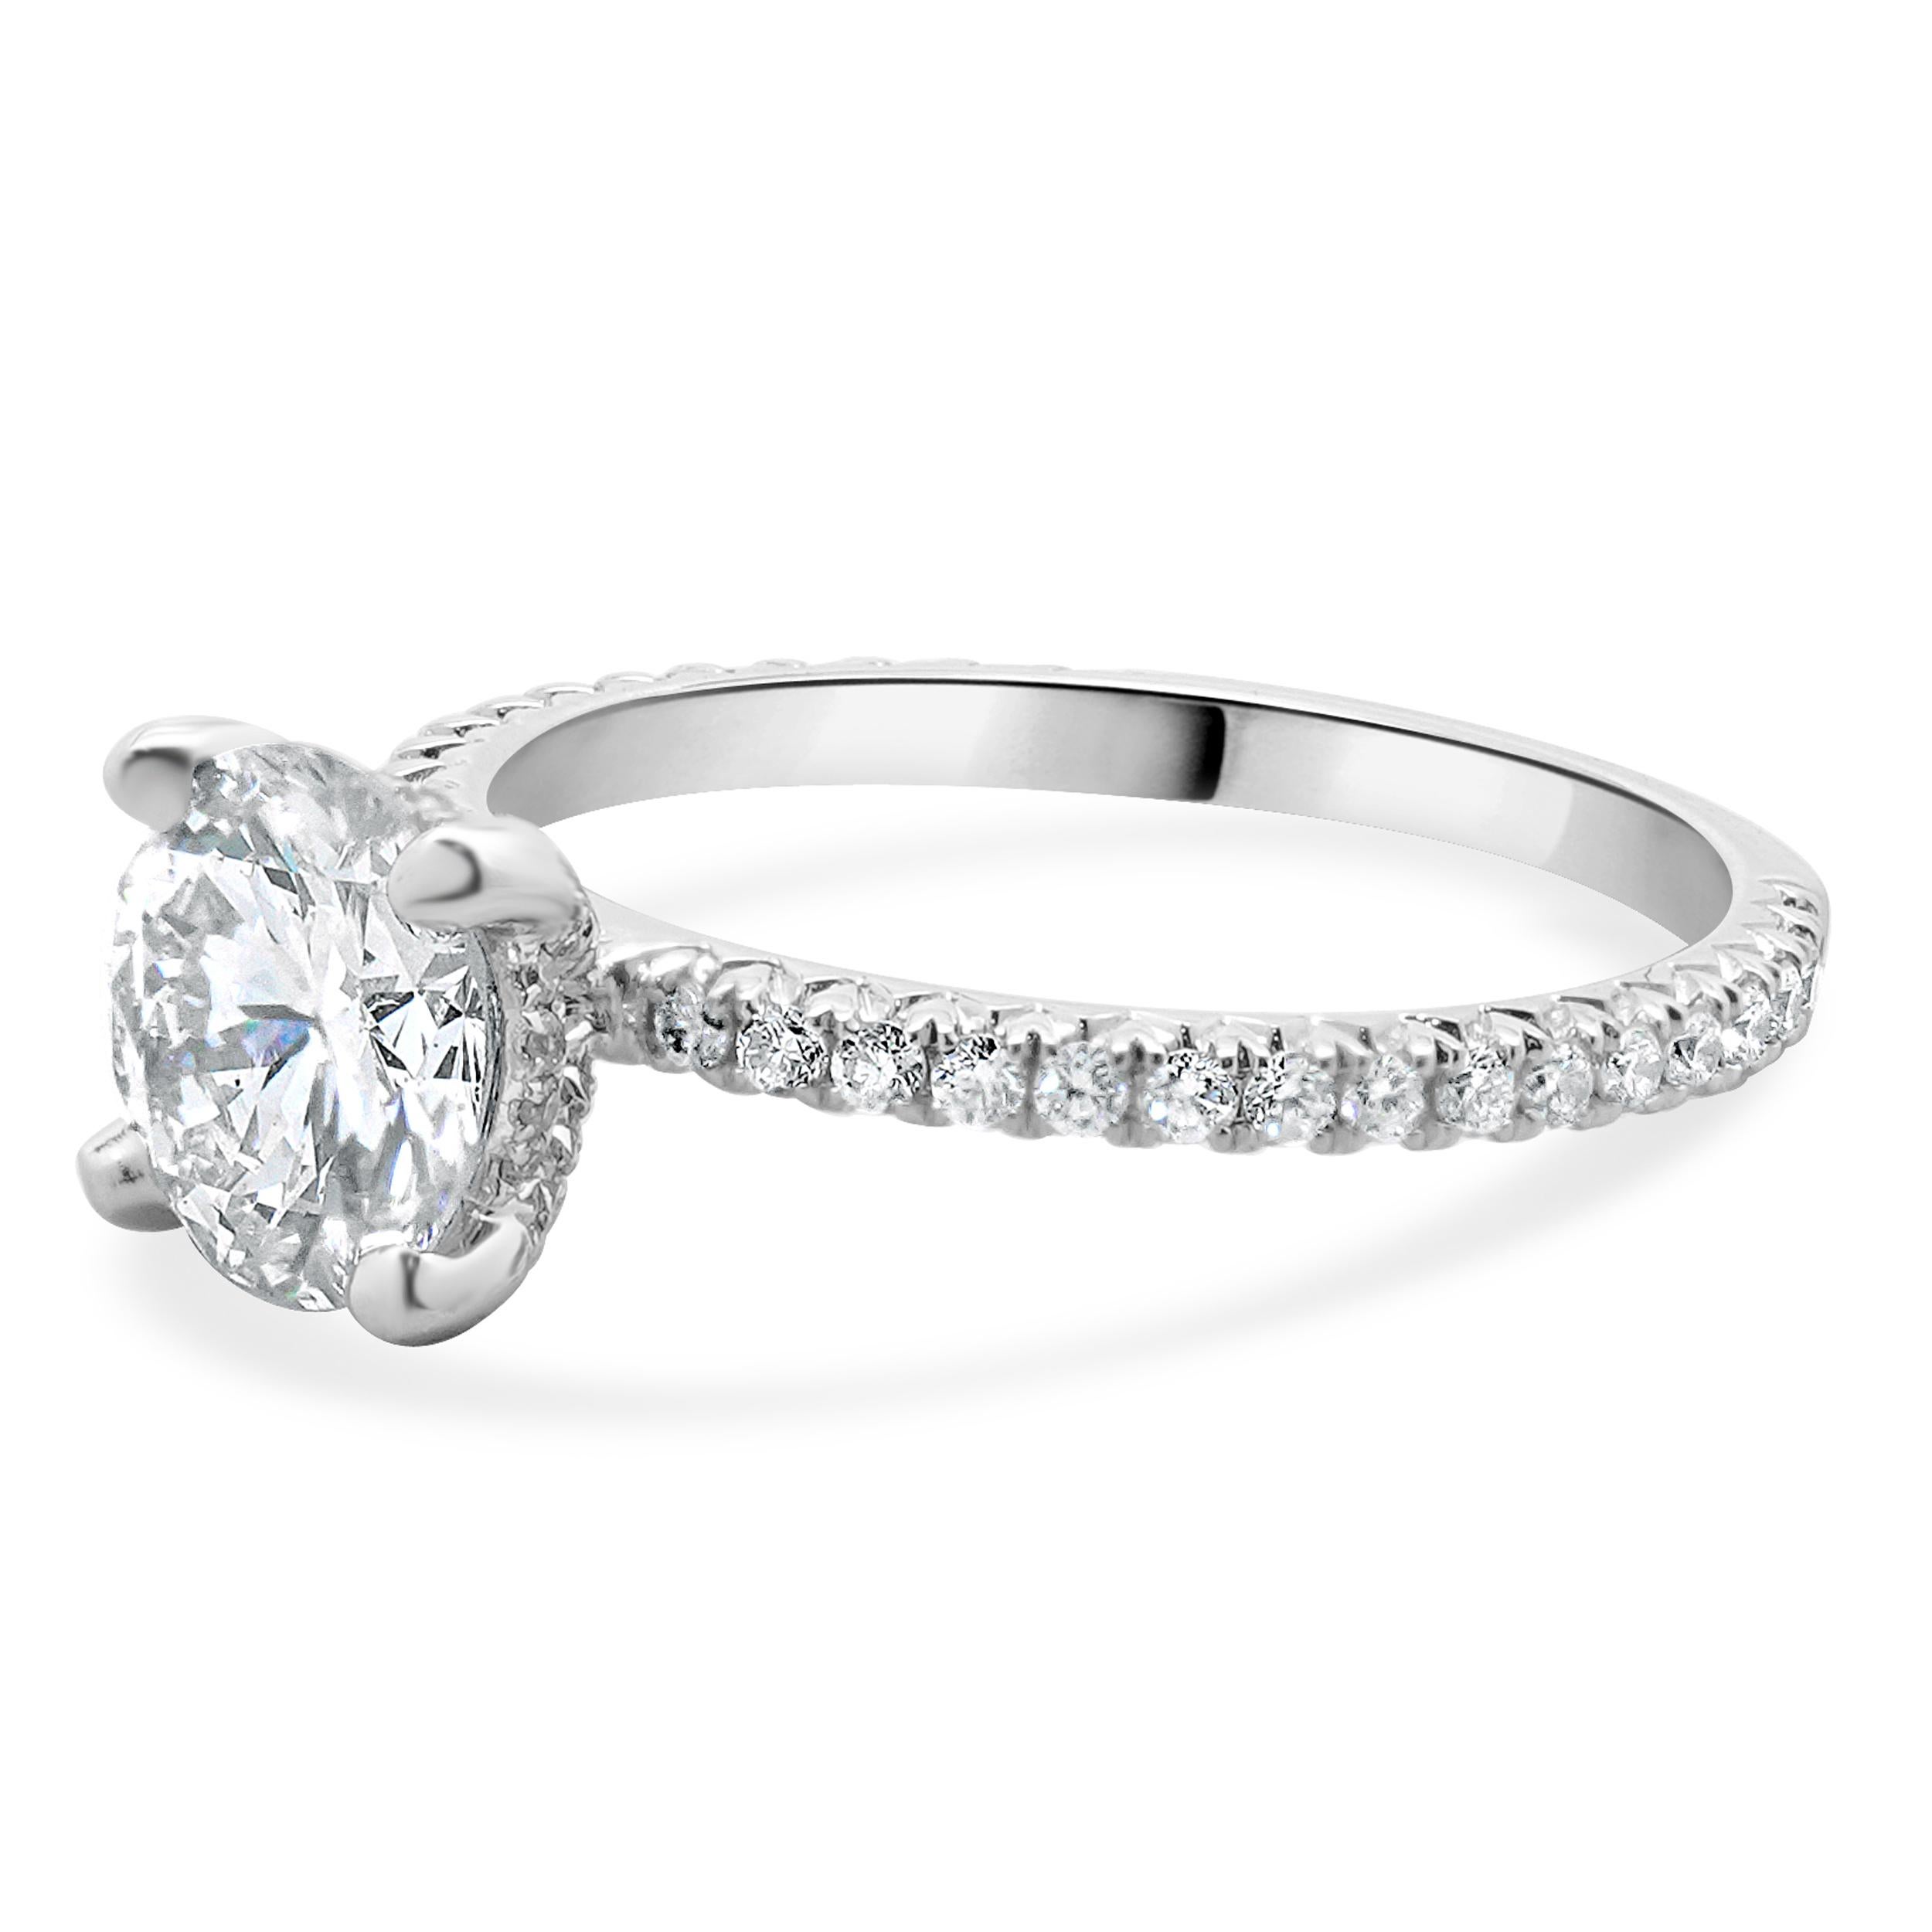 Designer: custom
Material: 14K white gold
Diamond: 1 round brilliant cut = 1.50ct
Color: J
Clarity: SI1
Diamond: round brilliant = 0.41cttw
Color: G
Clarity: SI1
Ring Size: 6.5 (complimentary sizing available)
Weight: 2.53 grams
